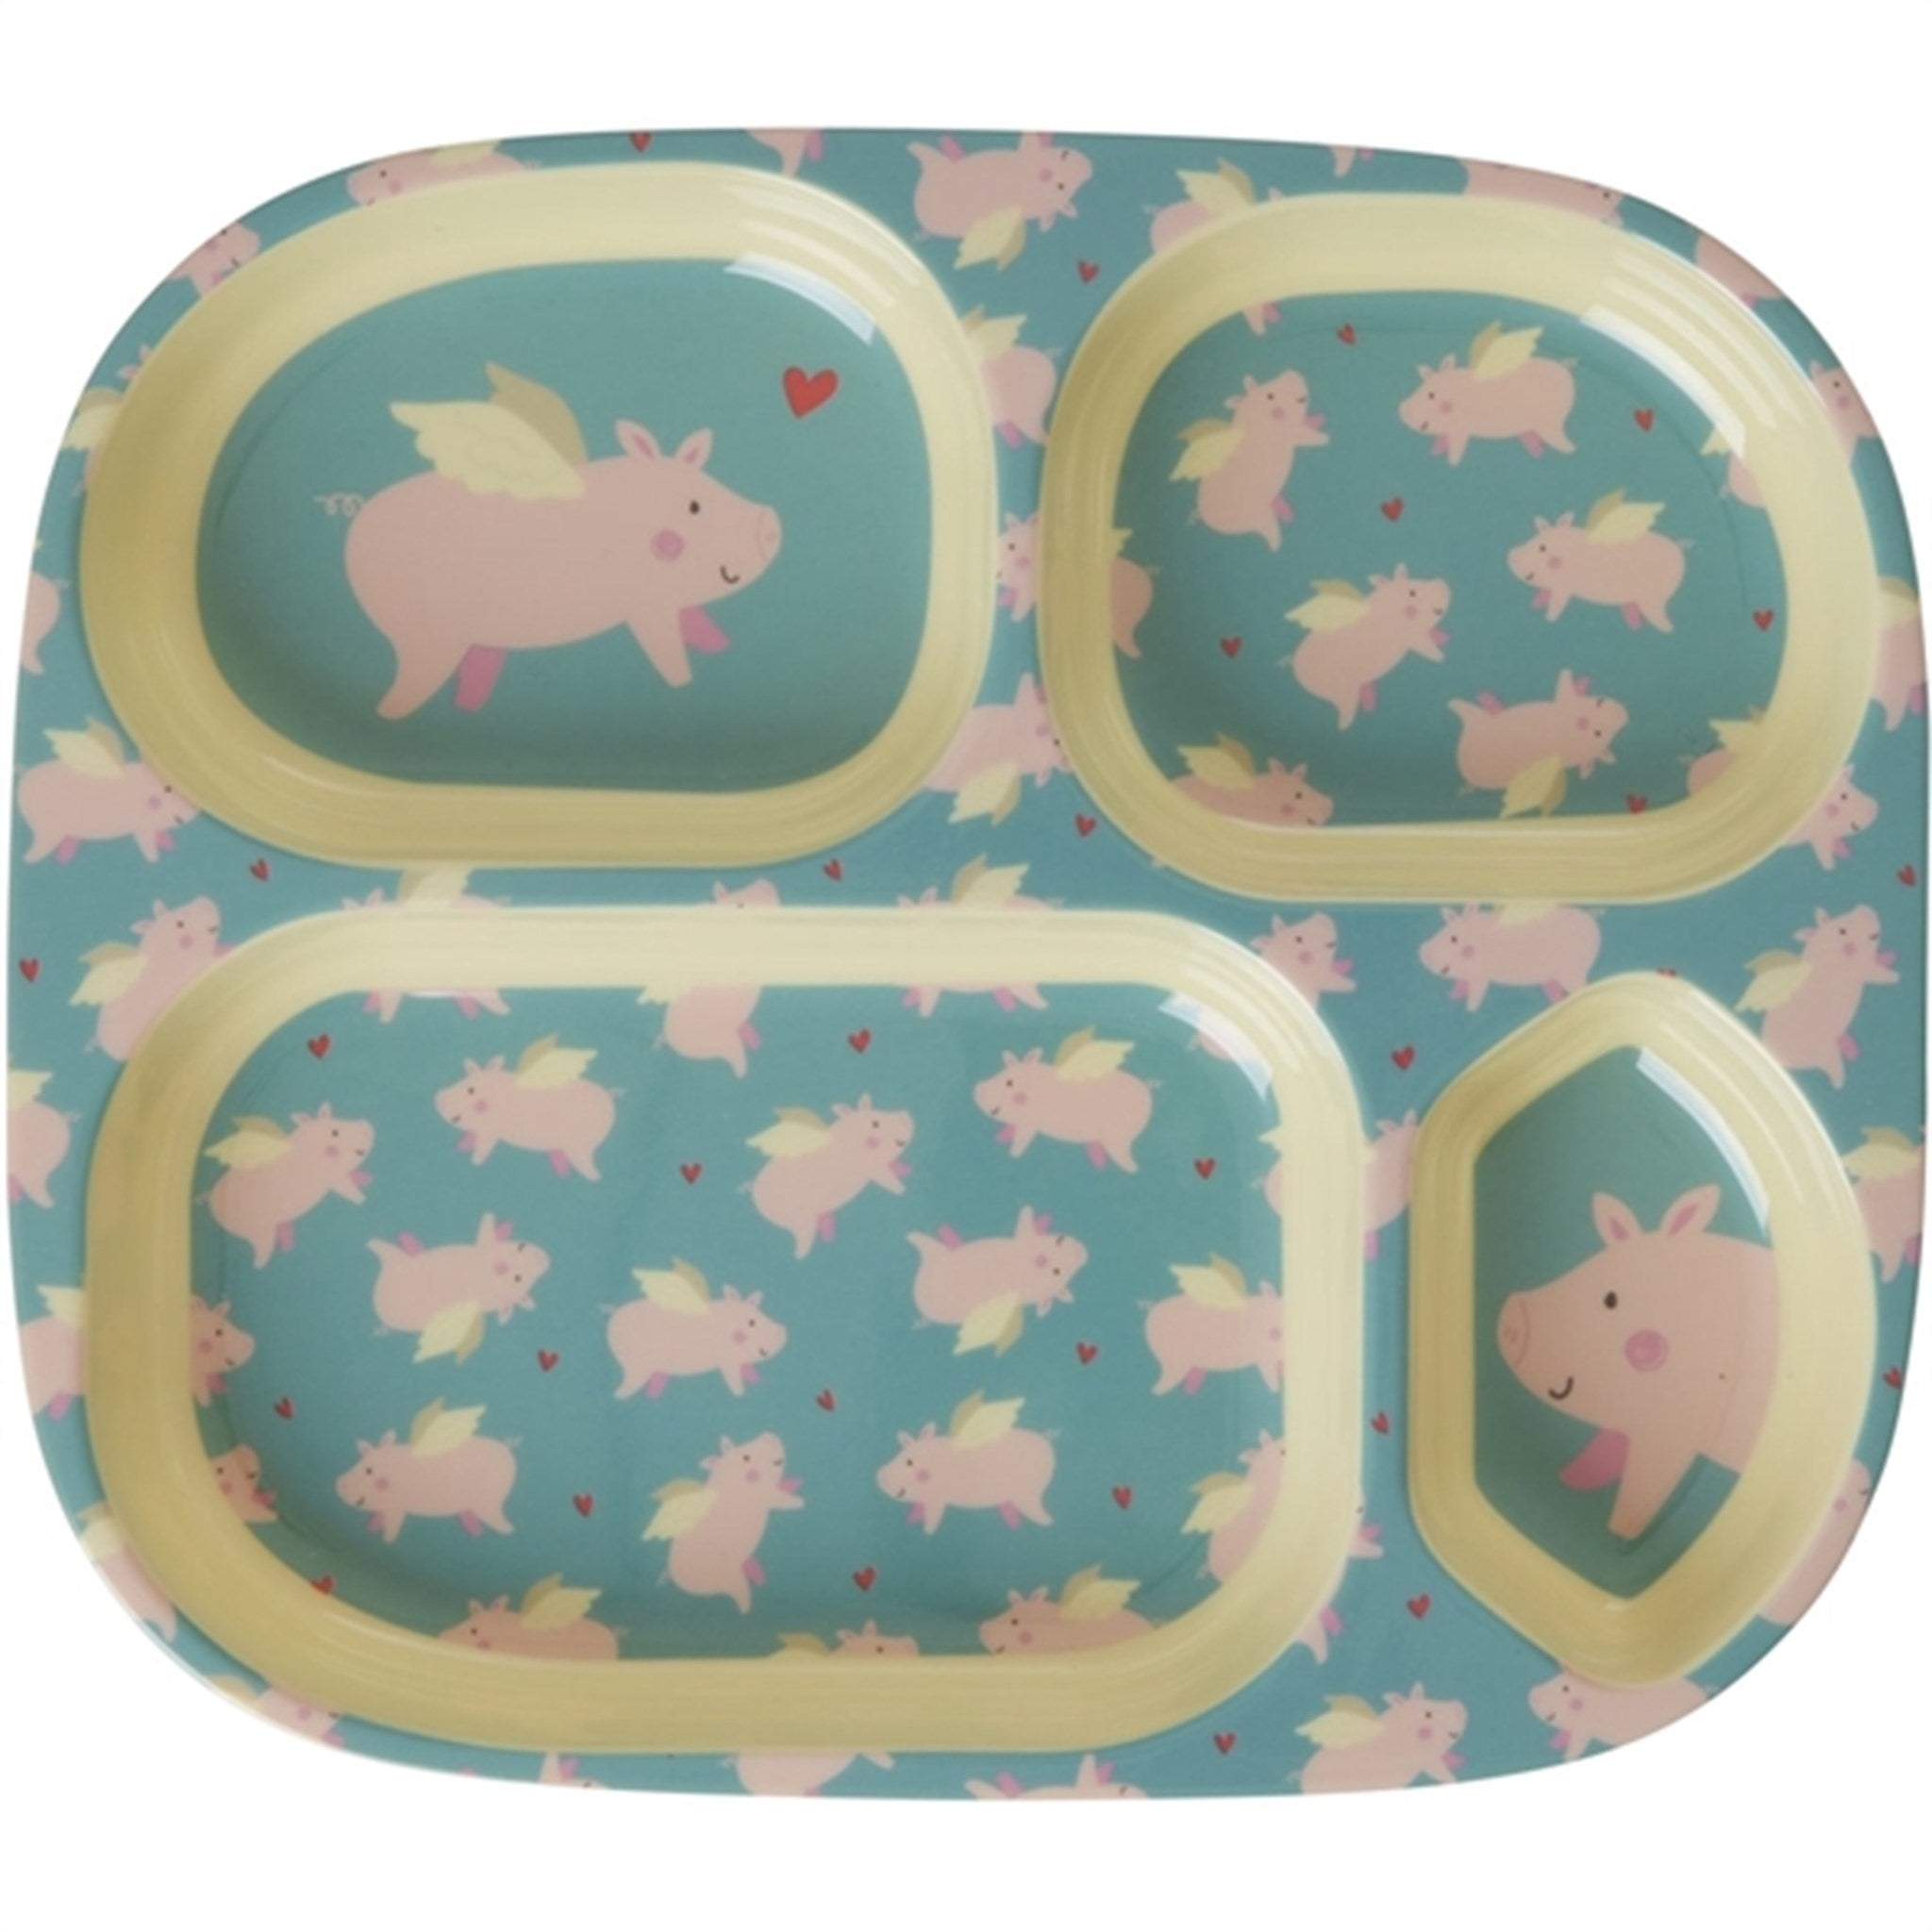 RICE Flying Pig Melamine Childrens Plate with 4 Rooms